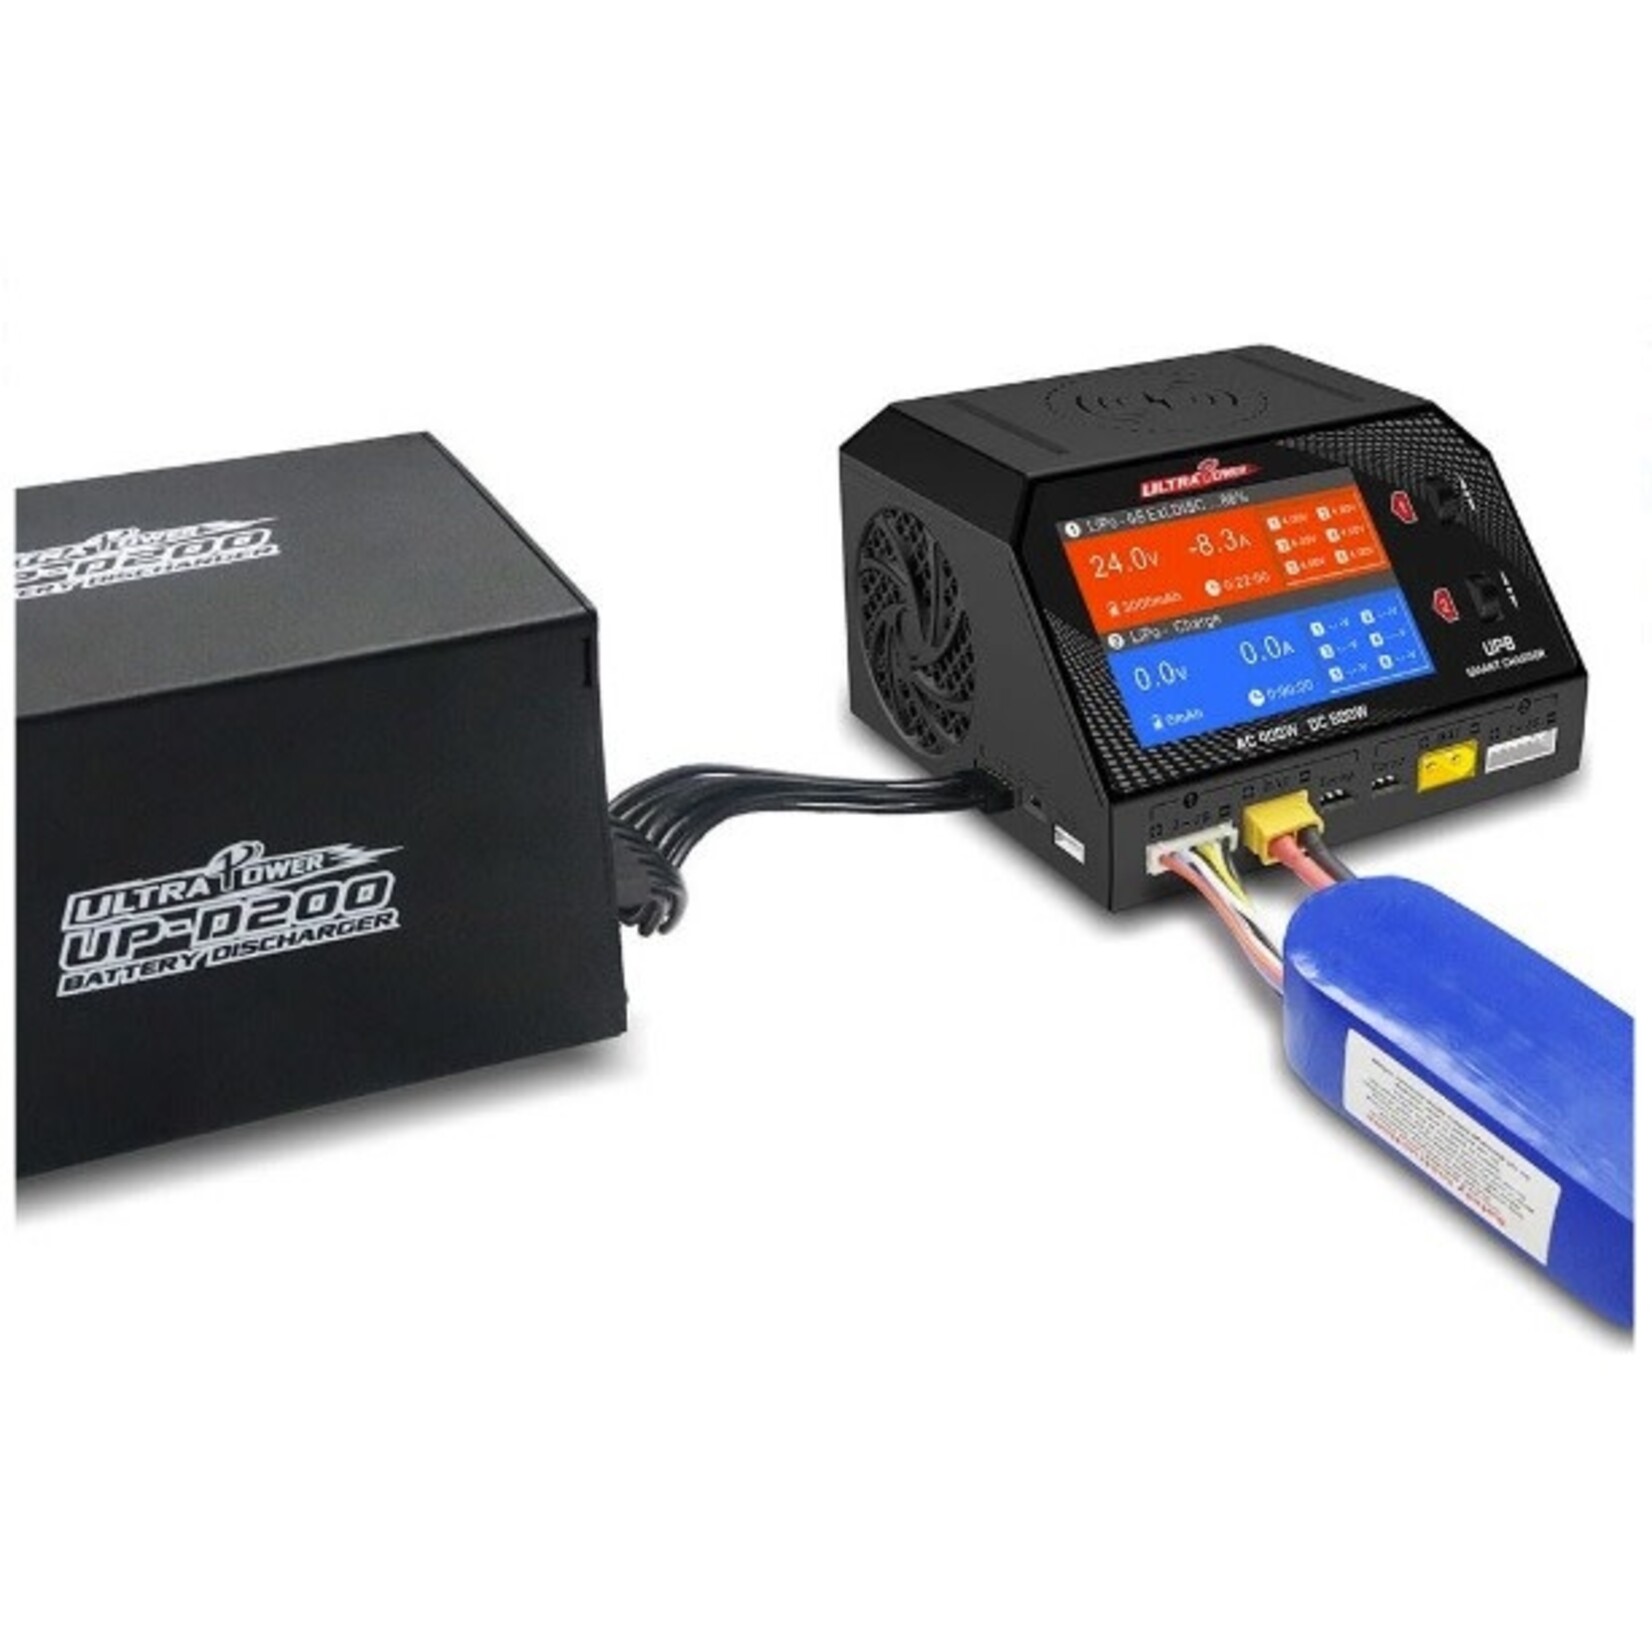 Ultra Power Ultra Power UP8 AC 400W / DC 600W 16A x2 Dual Channel Output 1-6S Battery Charger/Discharger/Balancer/Tester #UPTUP8